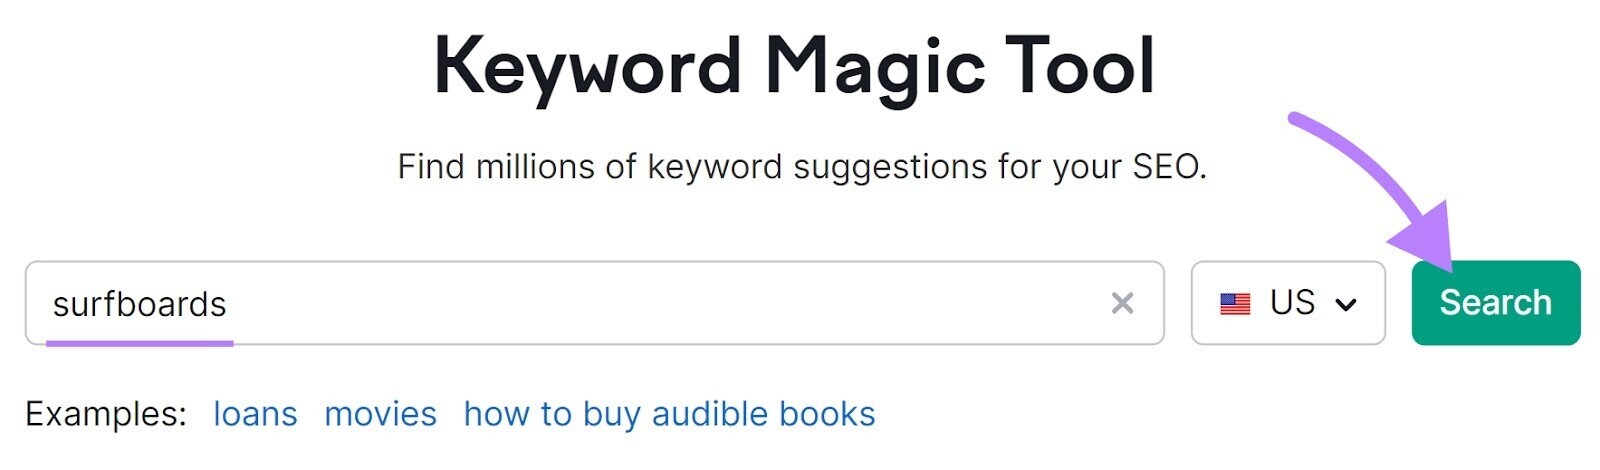 Searching for “surfboards” (US) in Keyword Magic Tool